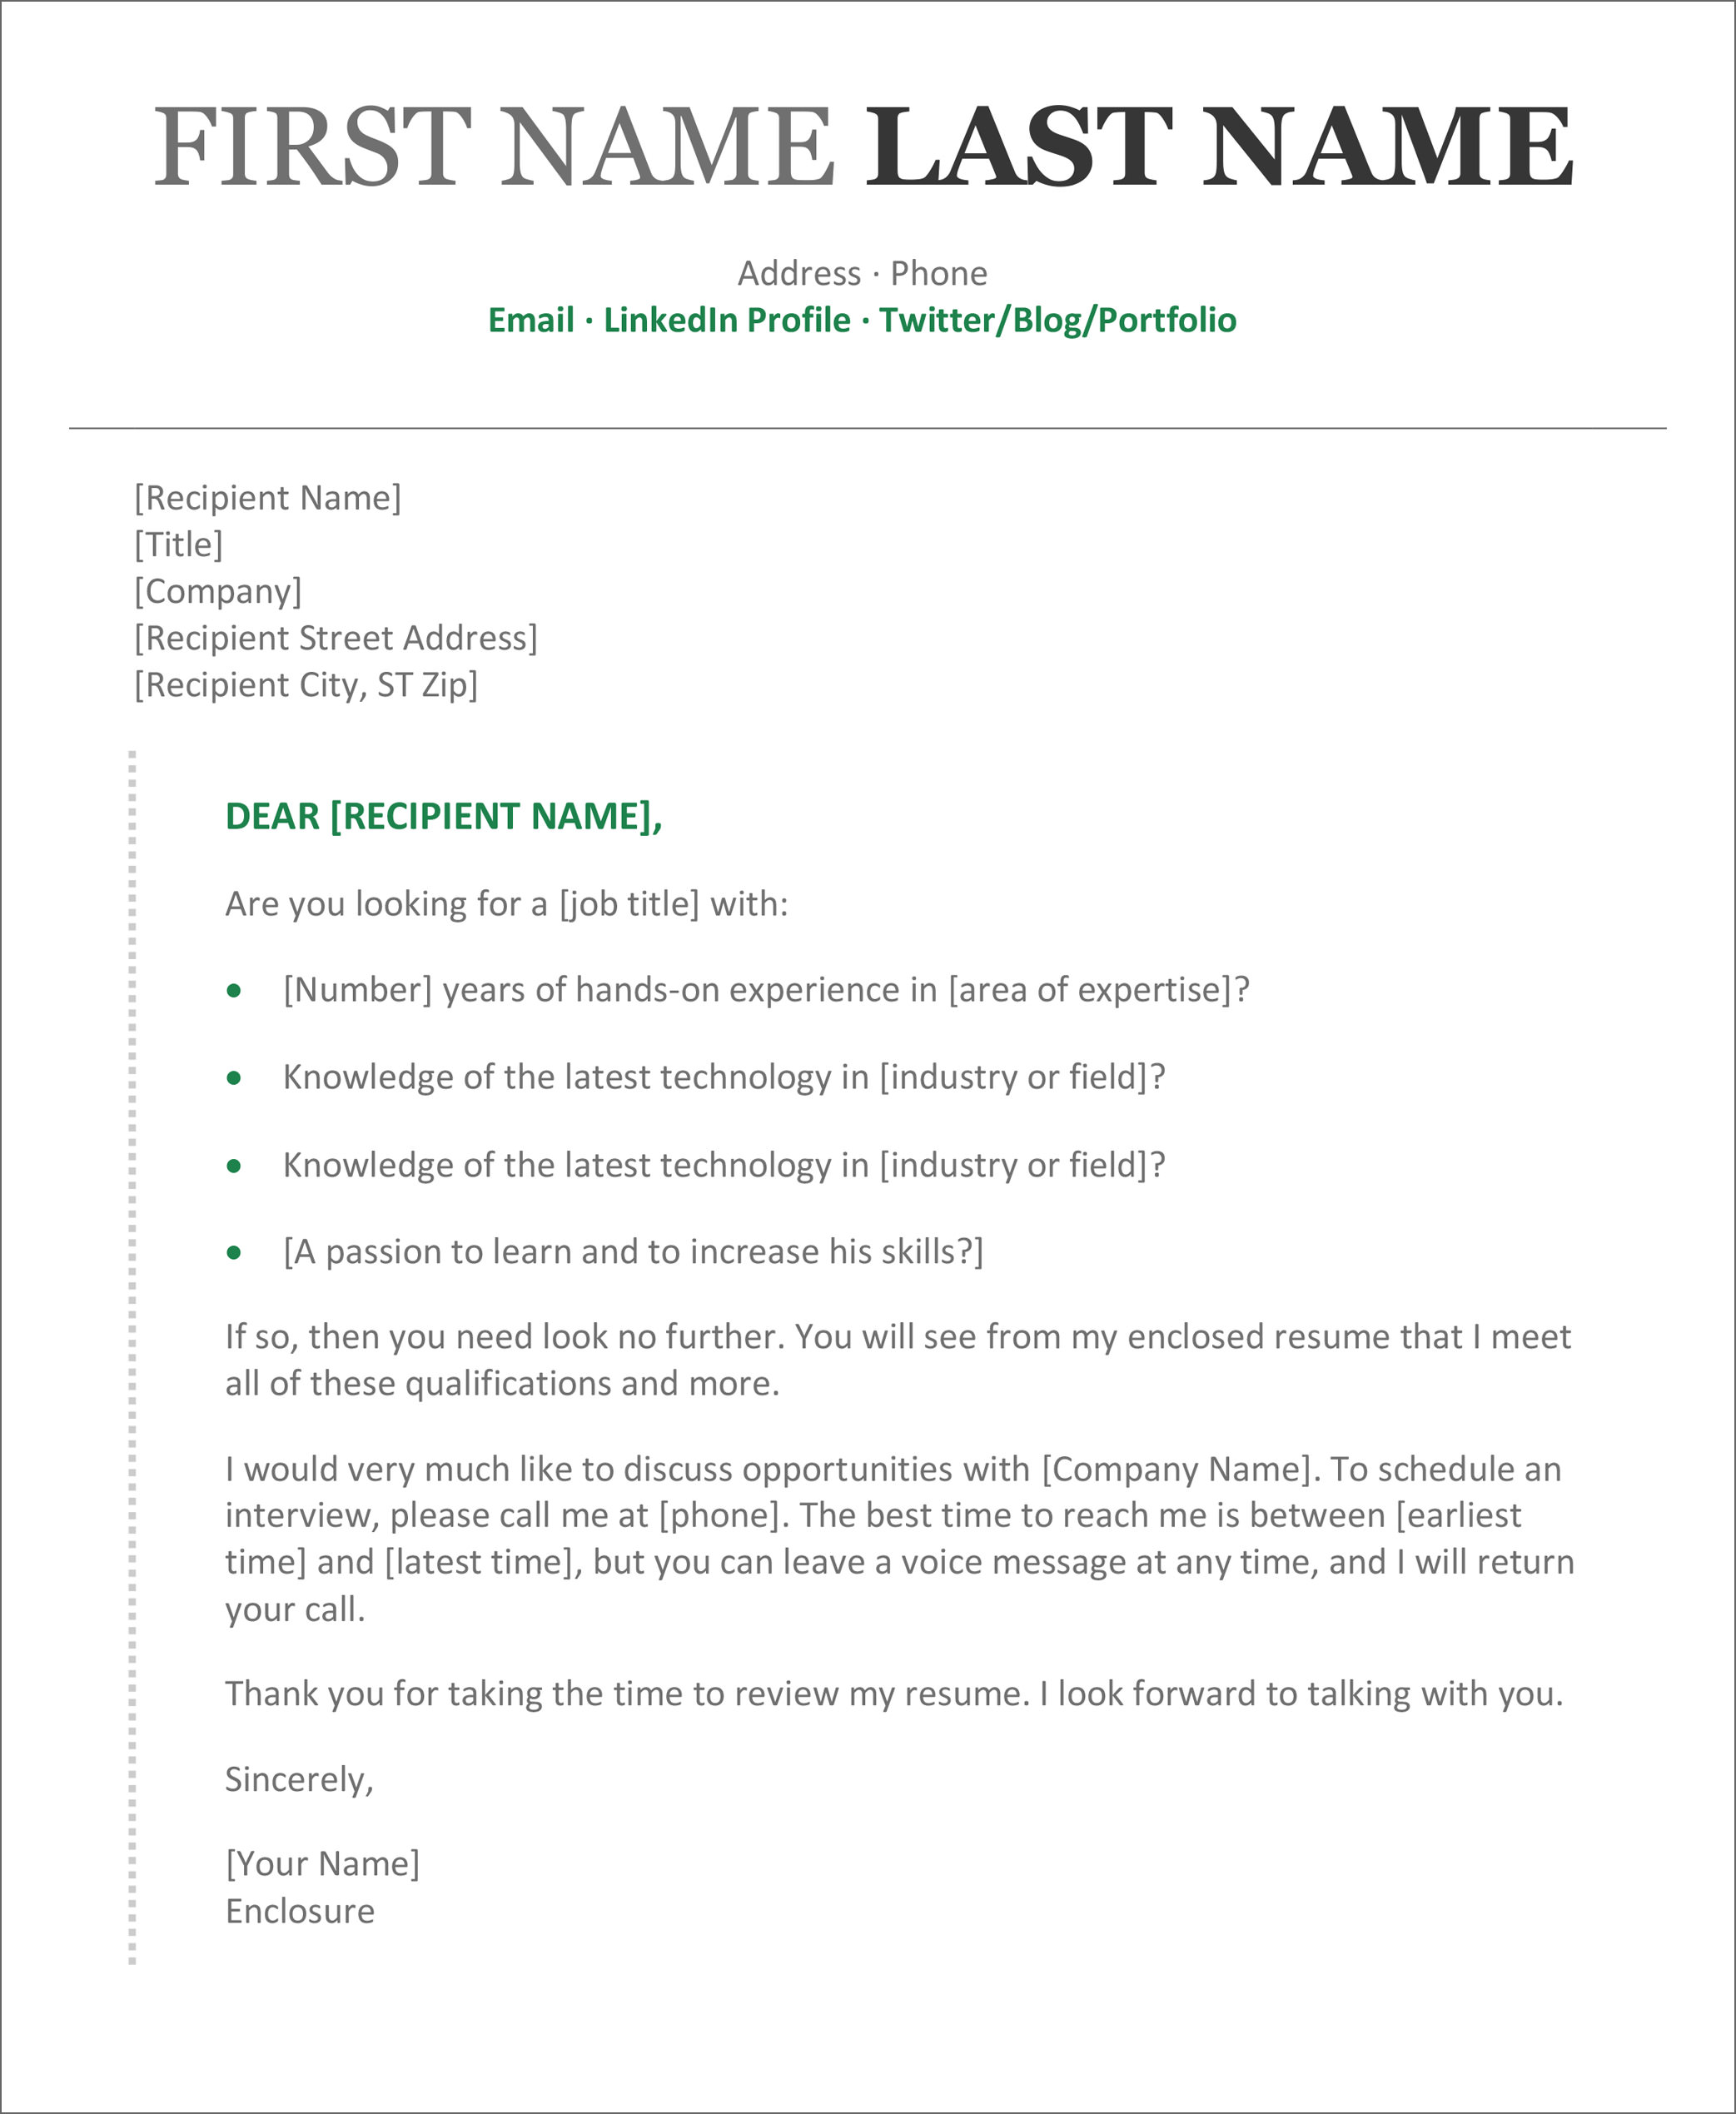 Cover Letter Template Free Download Word - FREE PRINTABLE TEMPLATES